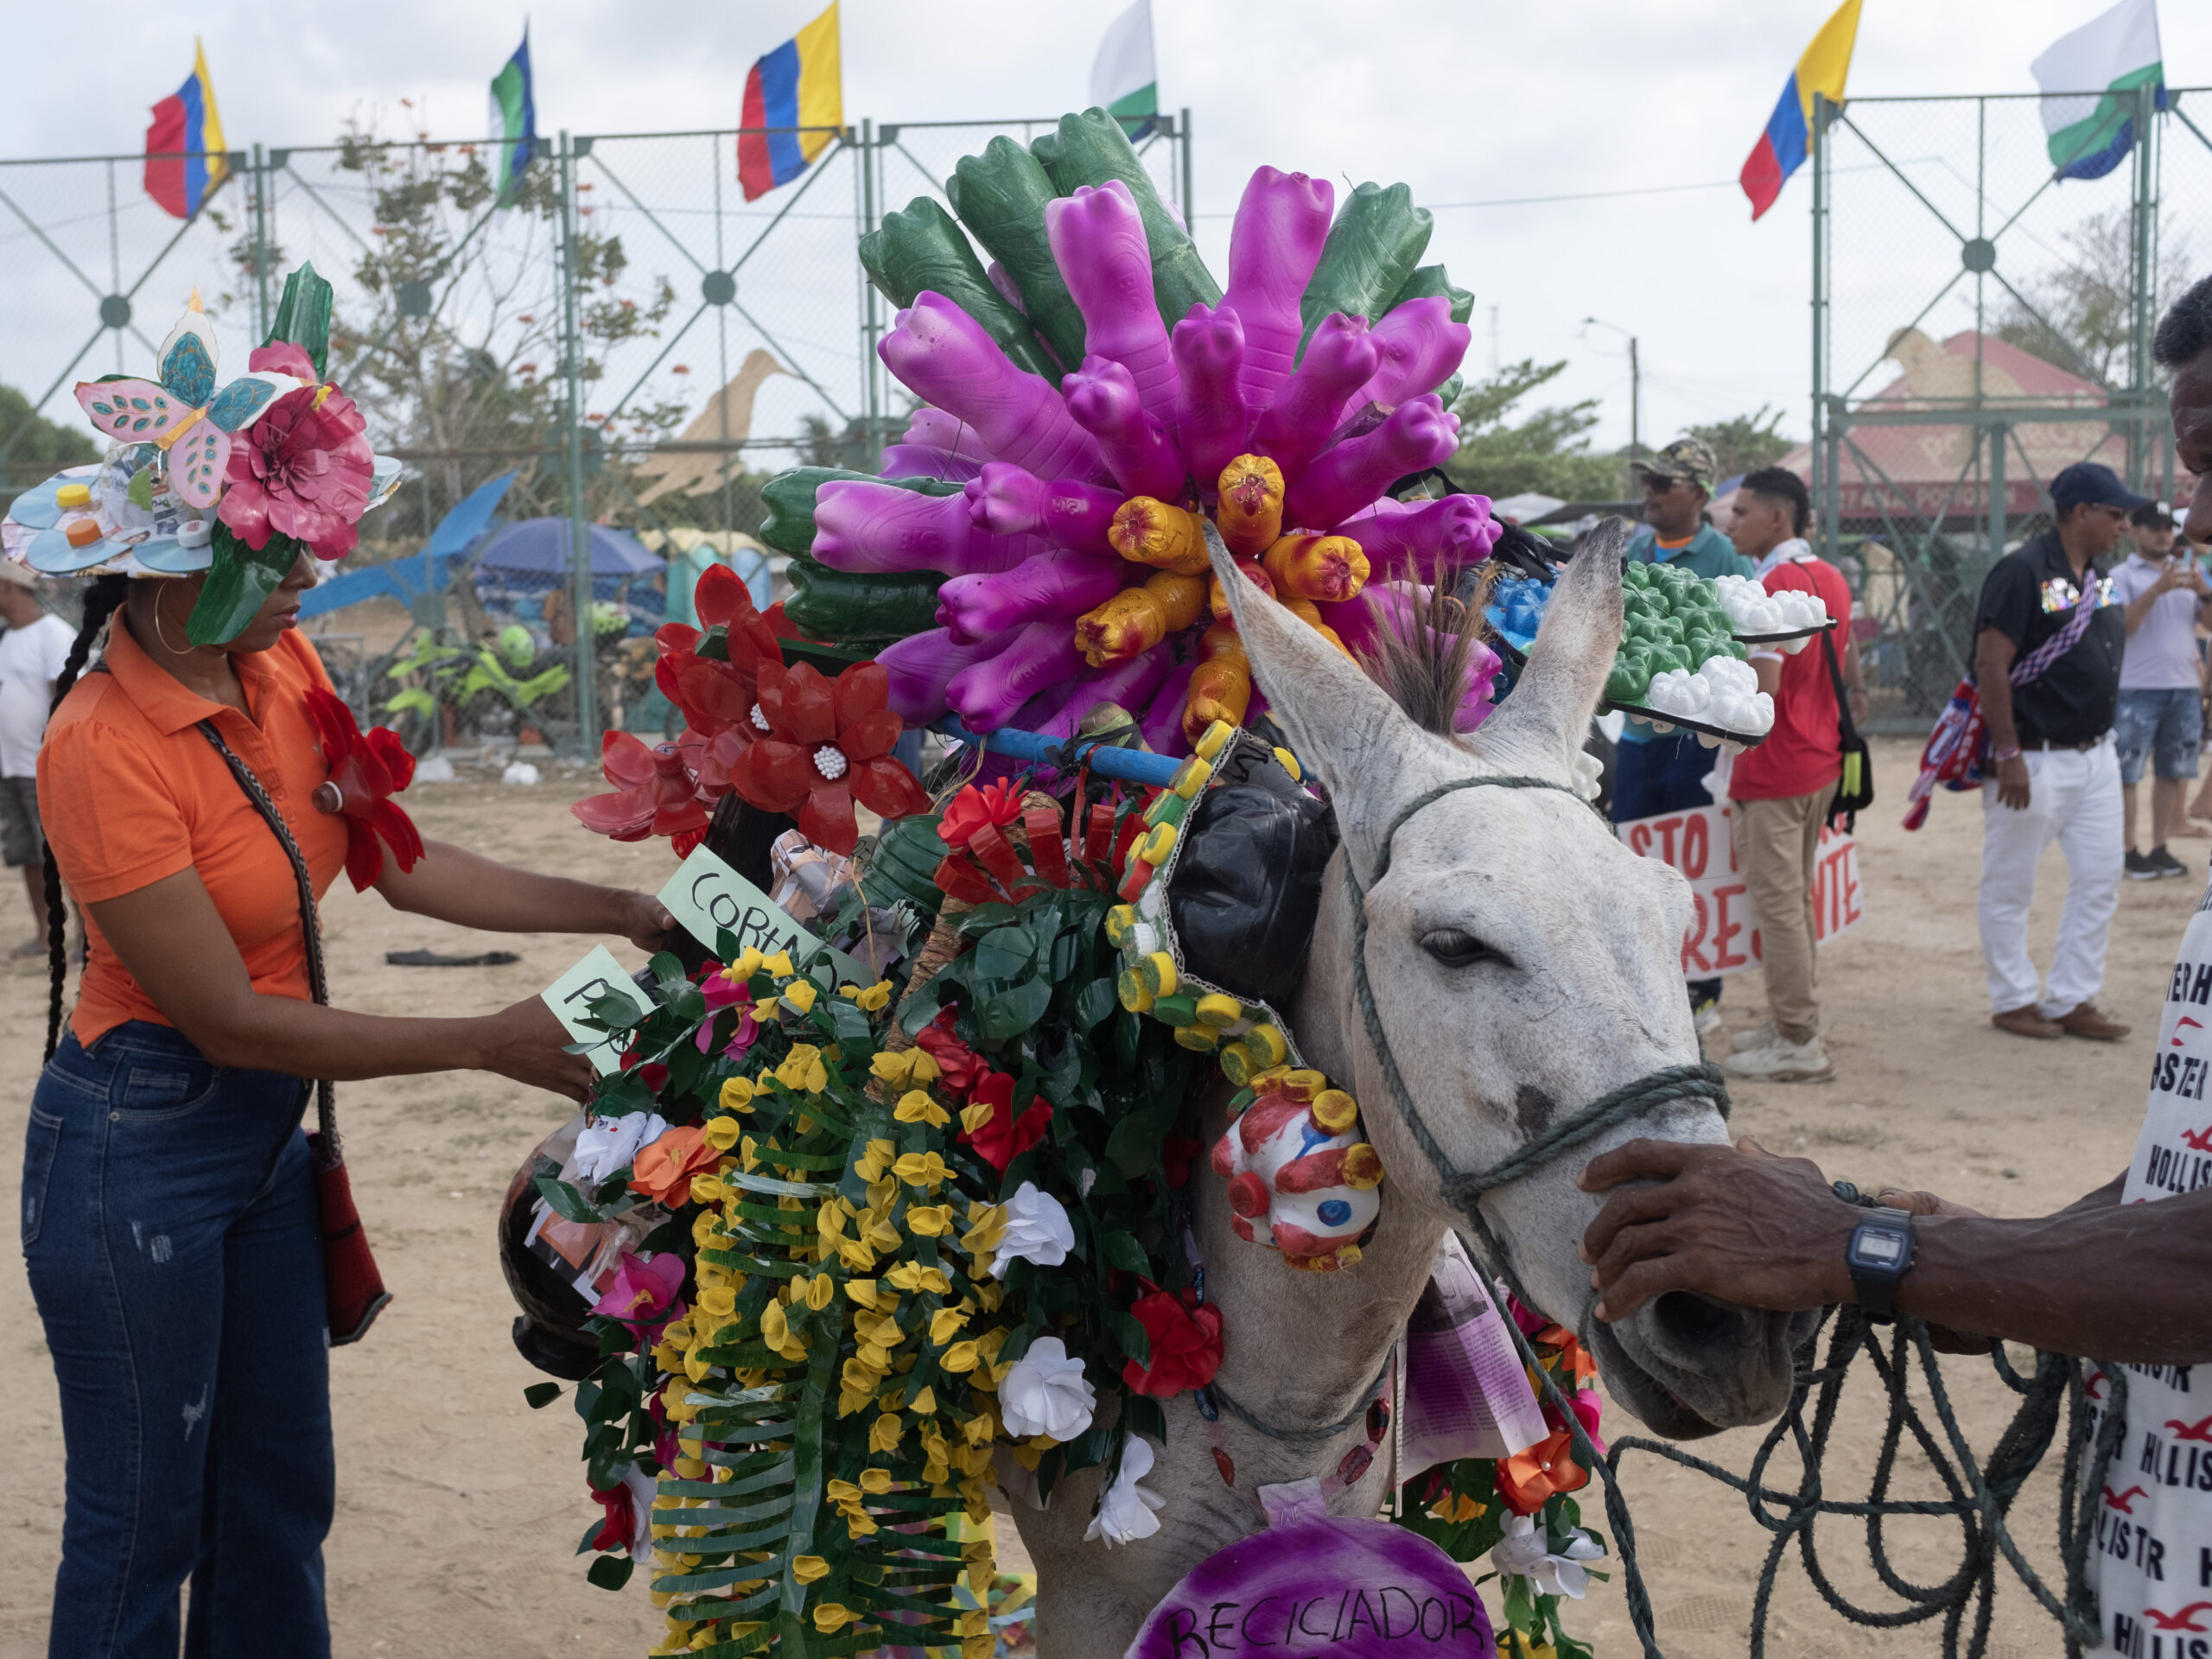 A donkey's owner makes last-minute adjustments ahead of the costume competition at the annual Donkey Festival in San Antero.